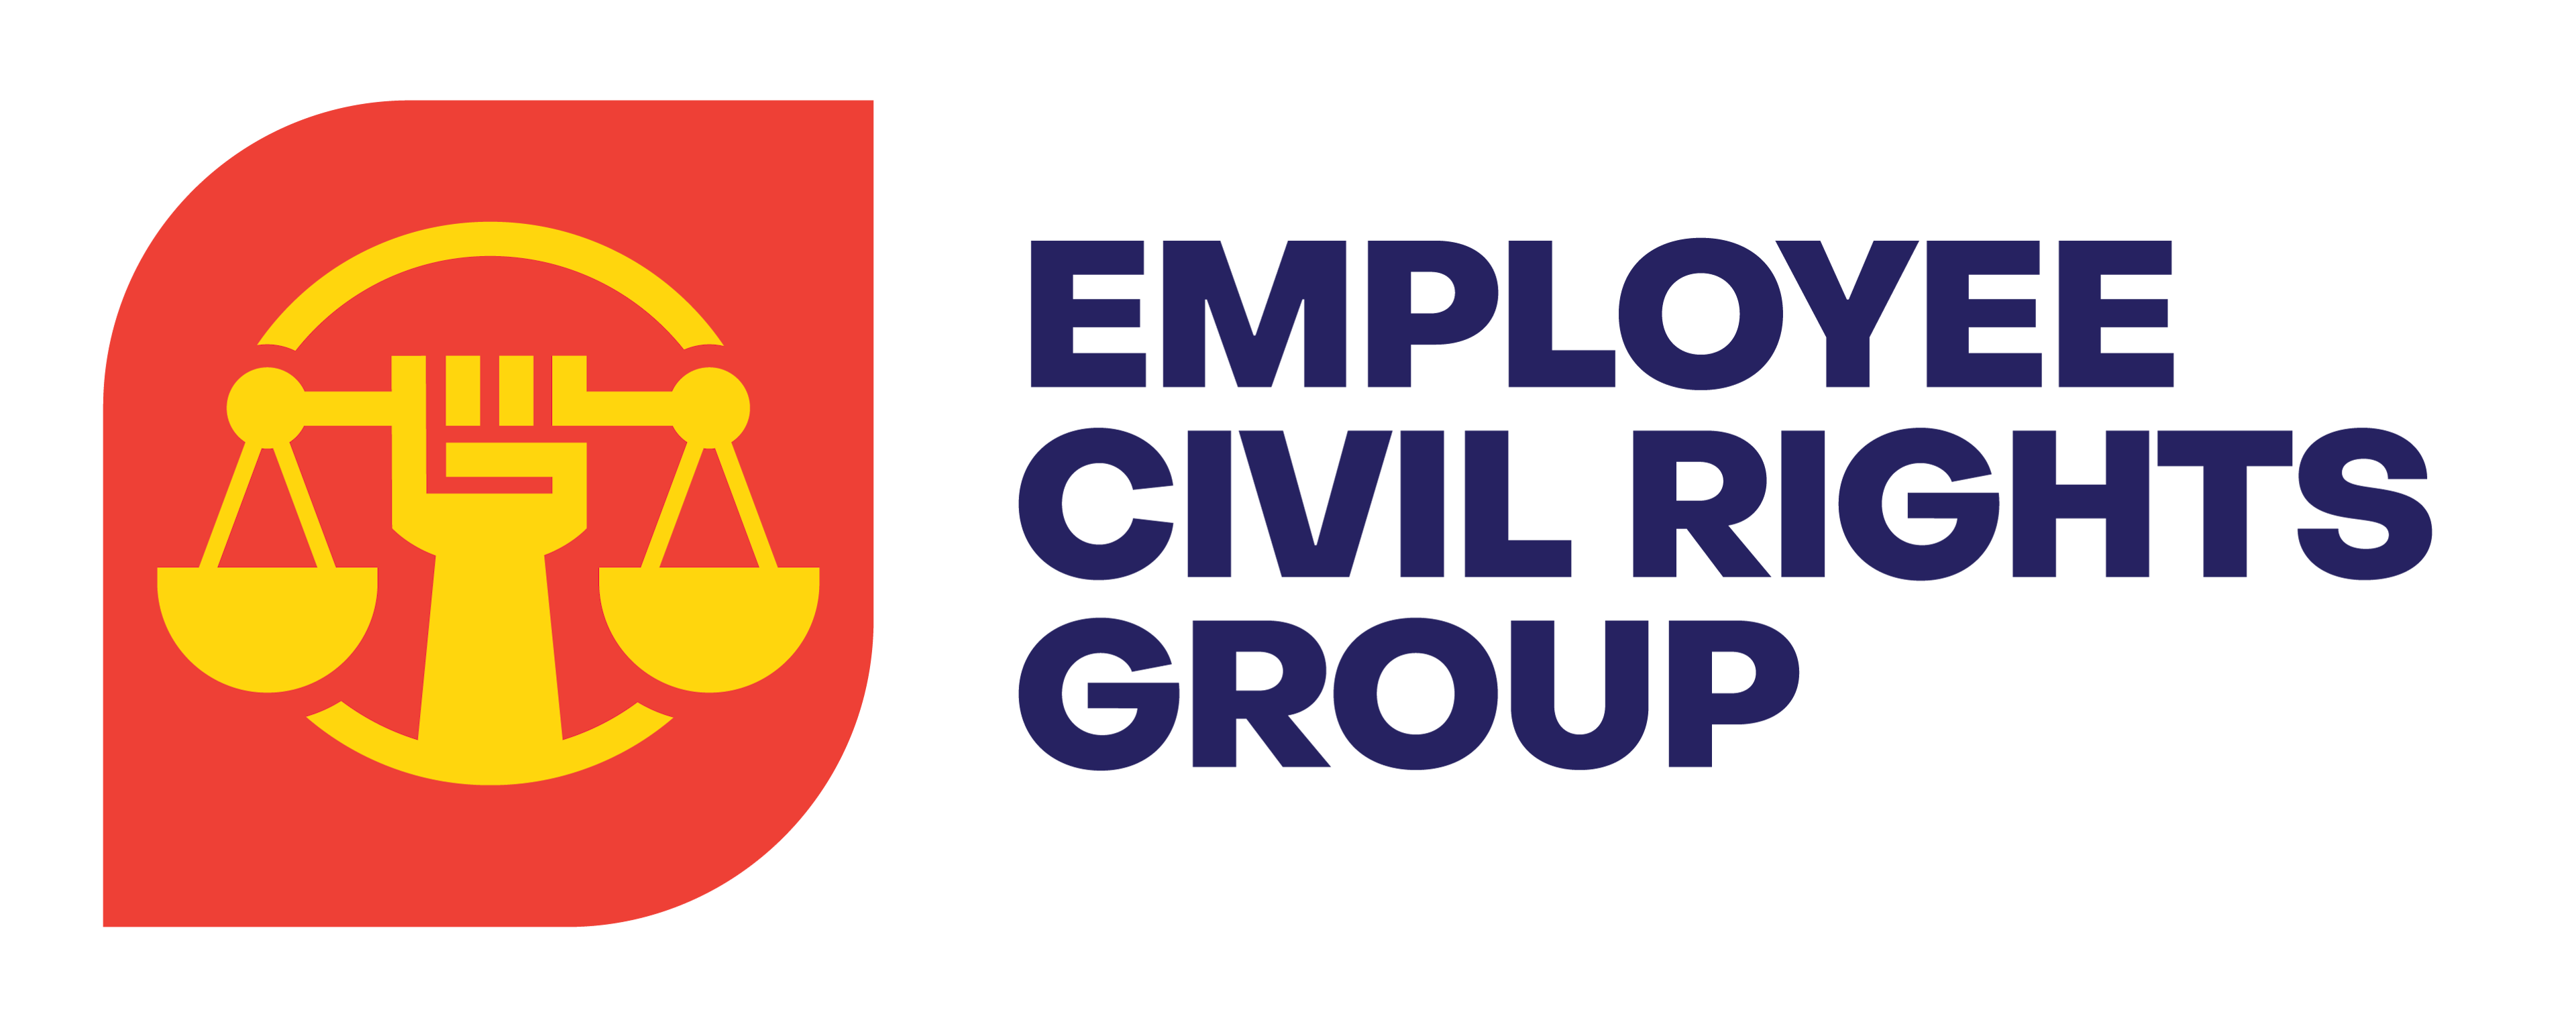 Employee Civil Rights Group